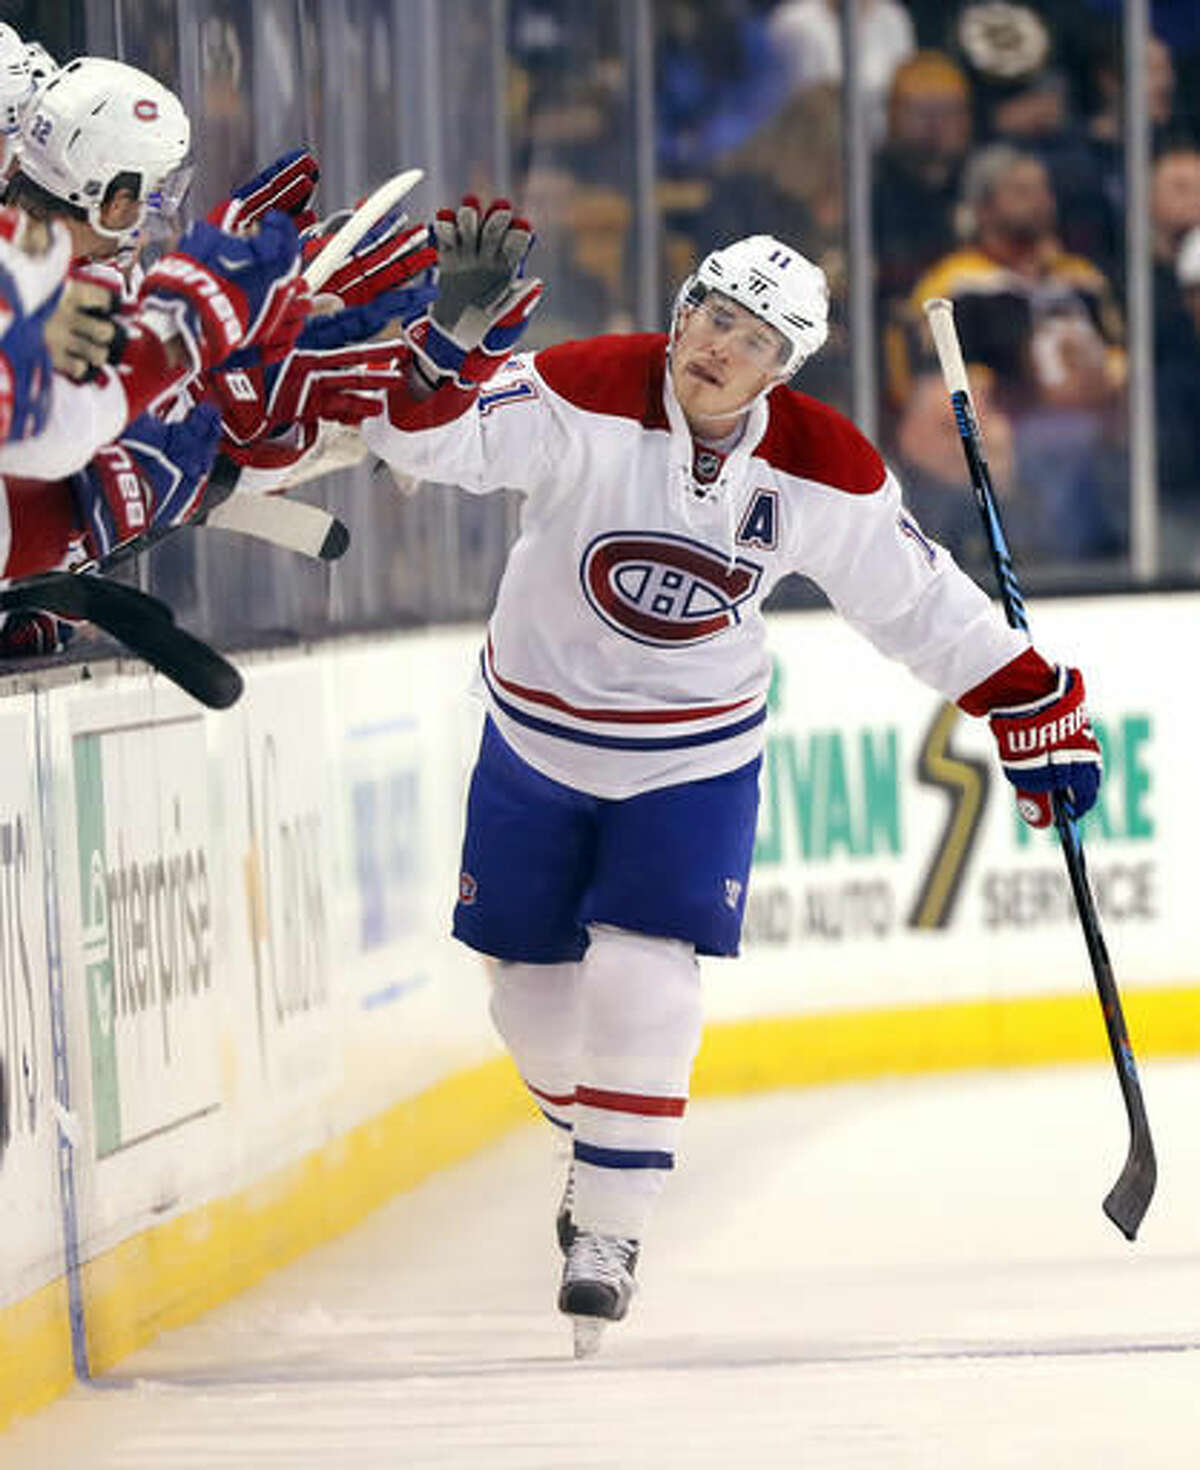 Montreal Canadiens' Brendan Gallagher is congratulated at the bench after scoring against the Boston Bruins during the second period of an NHL hockey game in Boston on Saturday, Oct. 22, 2016. (AP Photo/Winslow Townson)